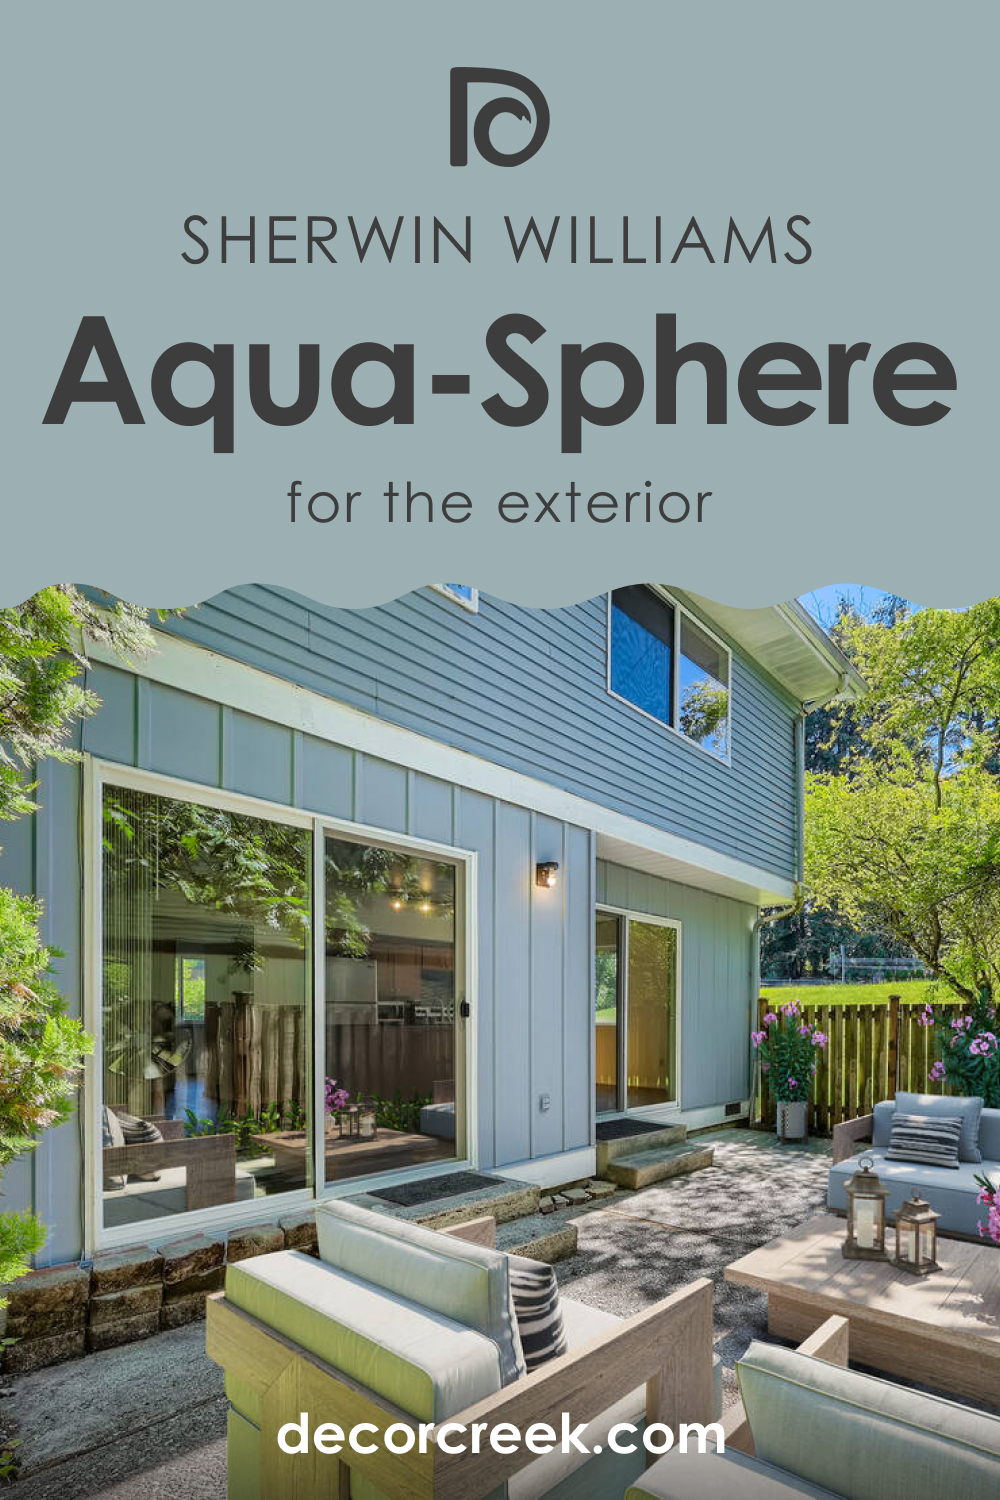 How to Use SW 7613 Aqua-Sphere for an Exterior?